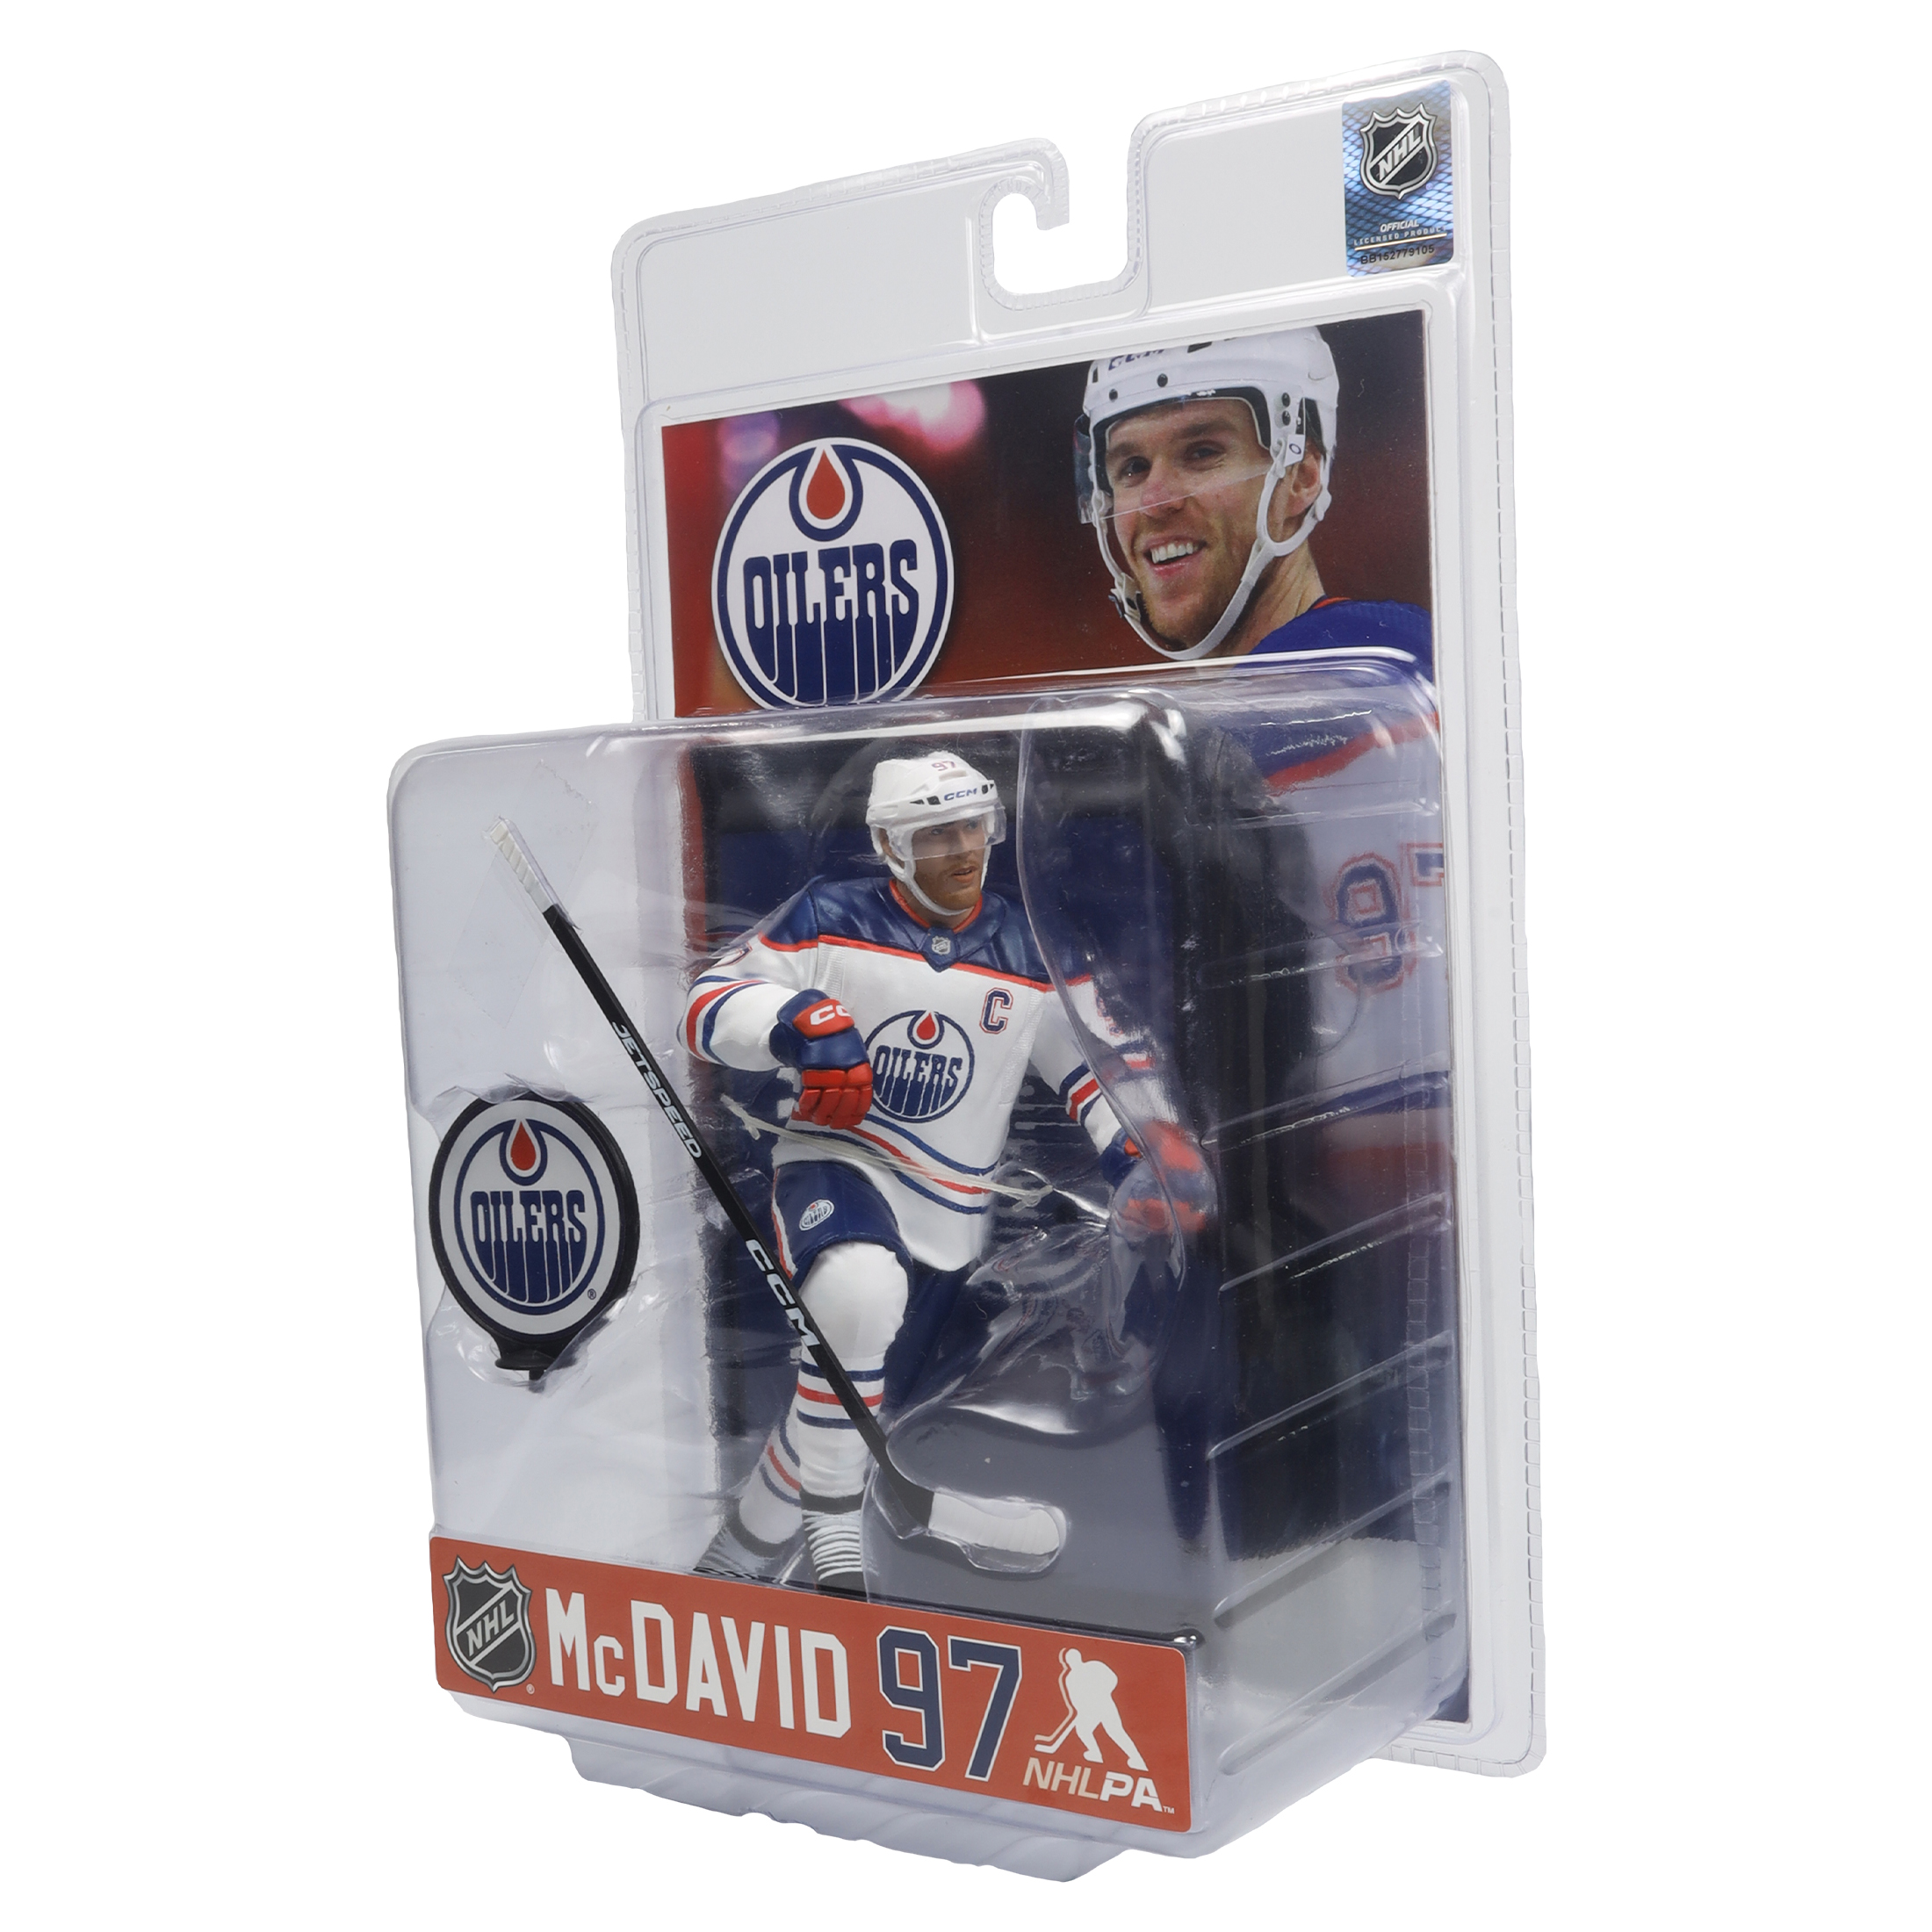 My Collection 2023 Edition: Edmonton Oilers 